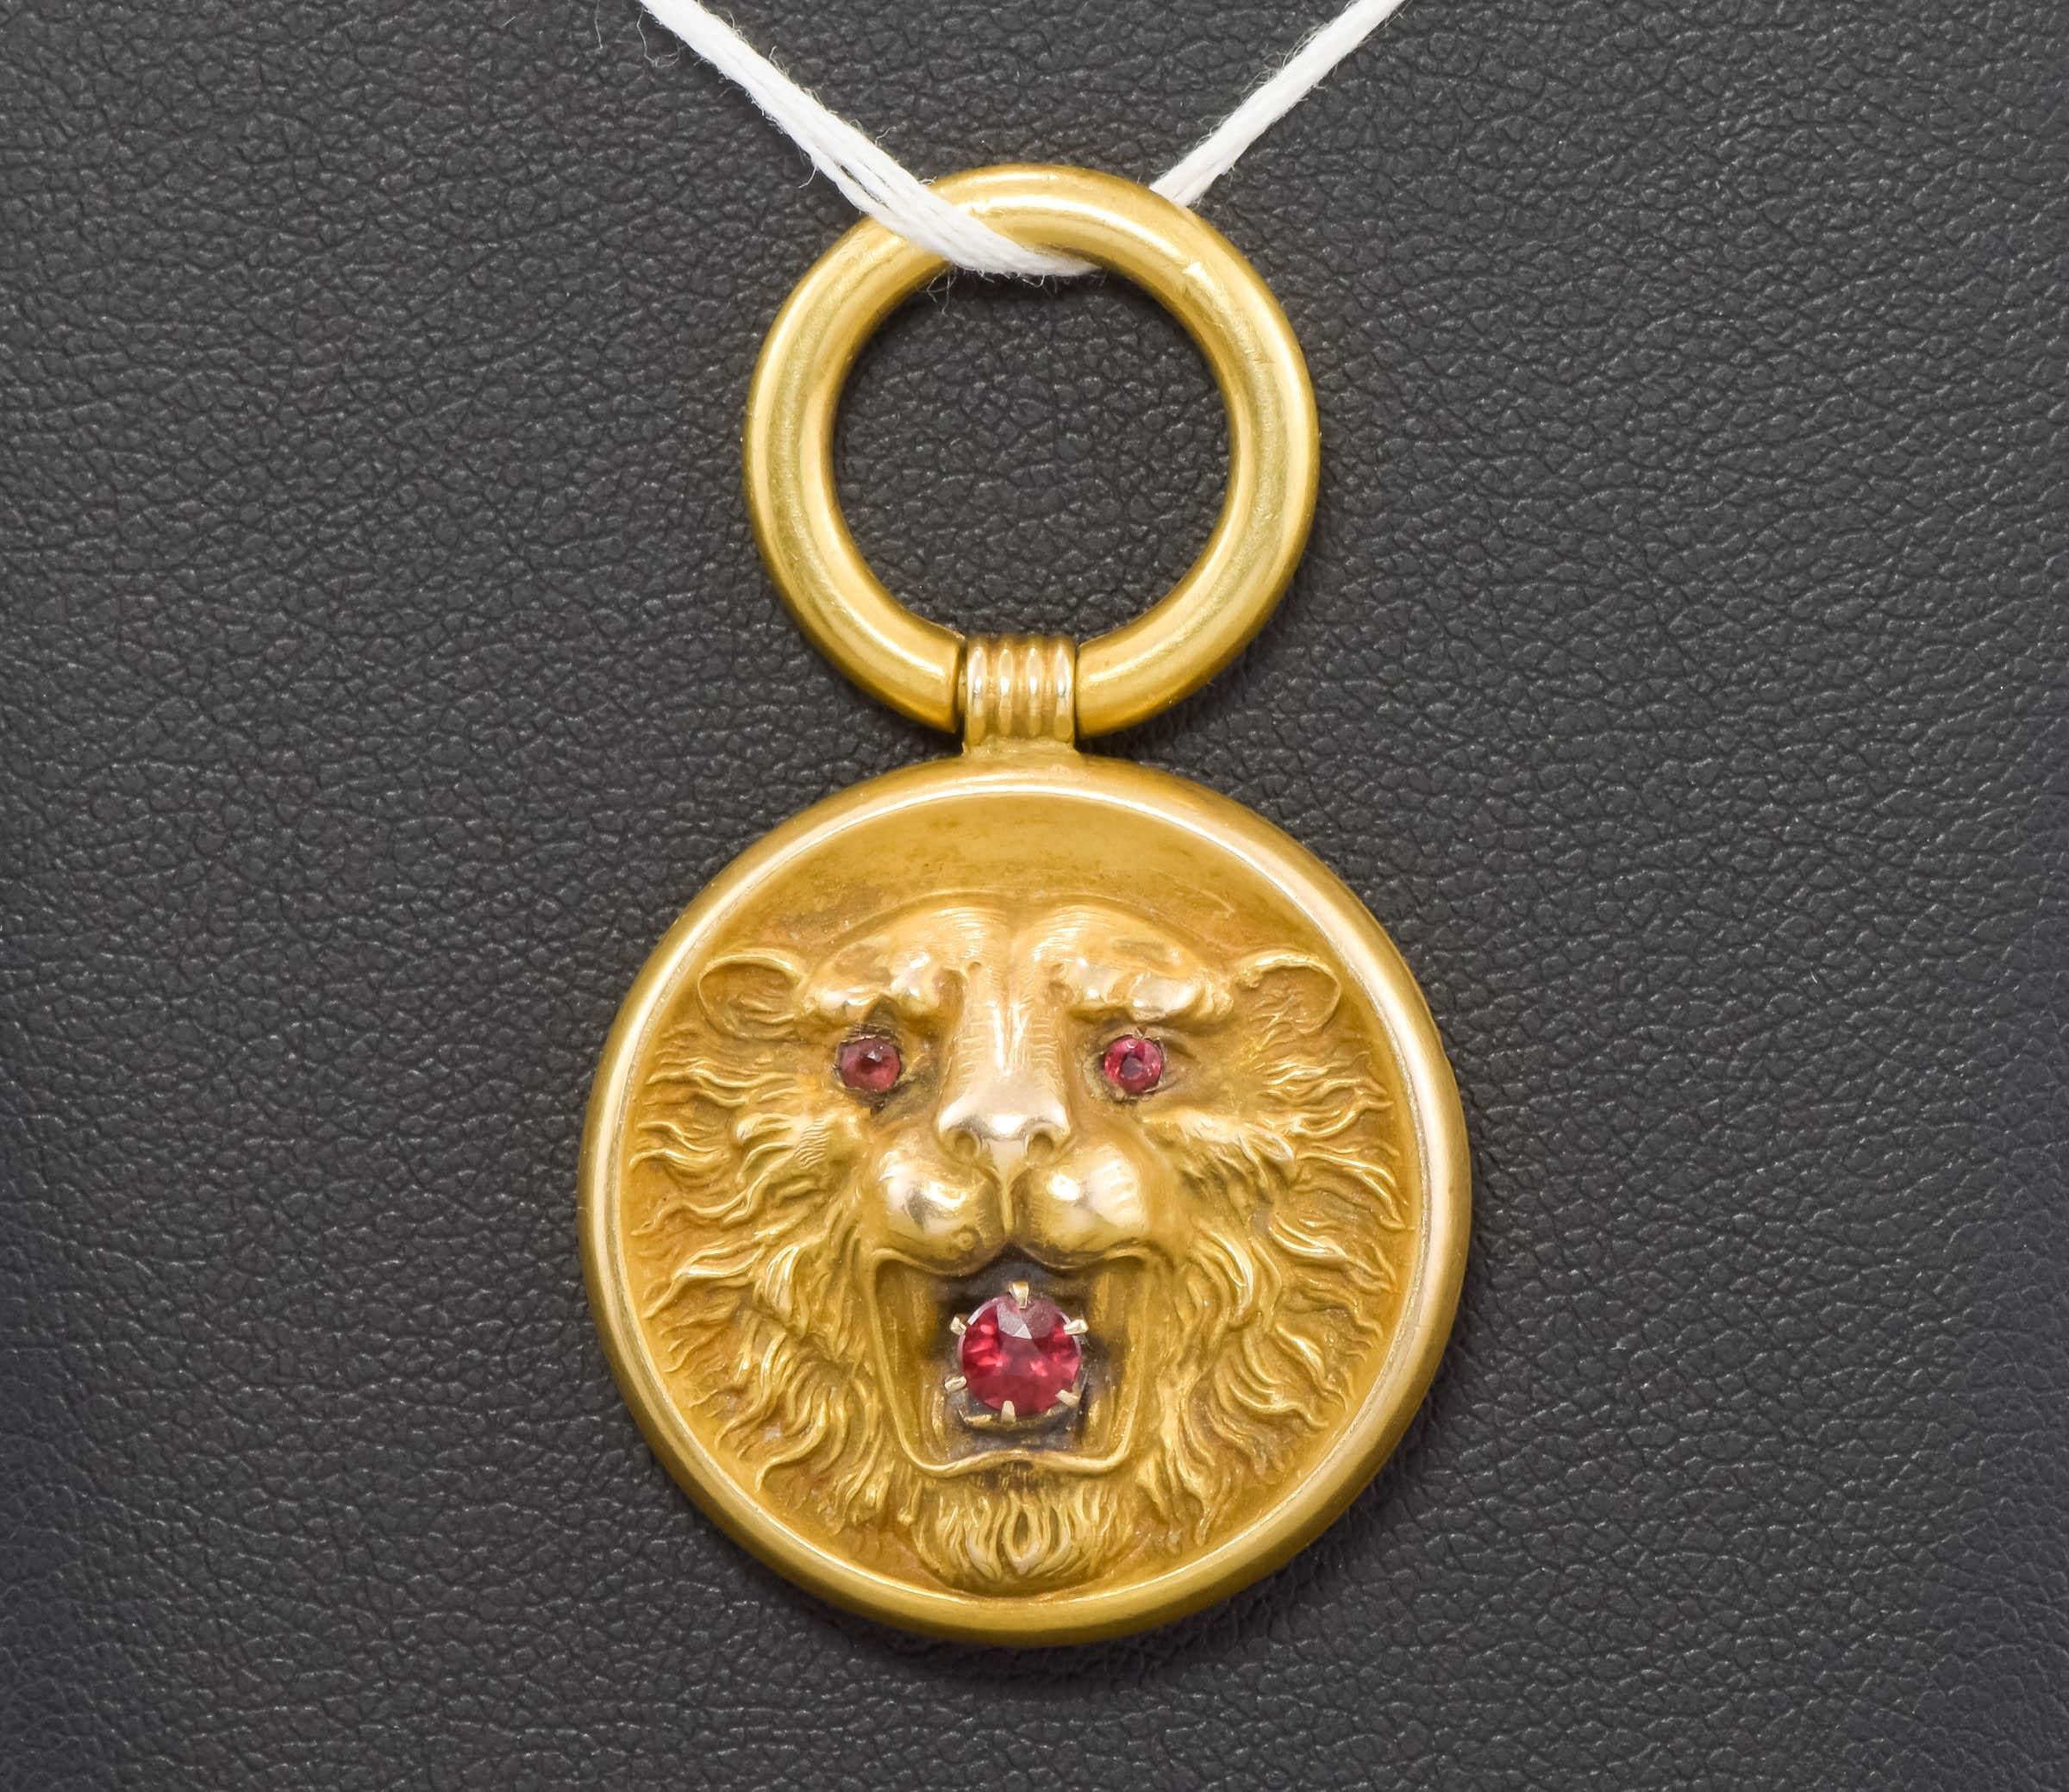 Dating to the Art Nouveau period, this handsome and dimensional gold Lion was originally worn as a pocket watch fob with ribbon - now he makes a wonderfully charming pendant.

Beautifully detailed in the repousse method, the Lion's open mouth holds